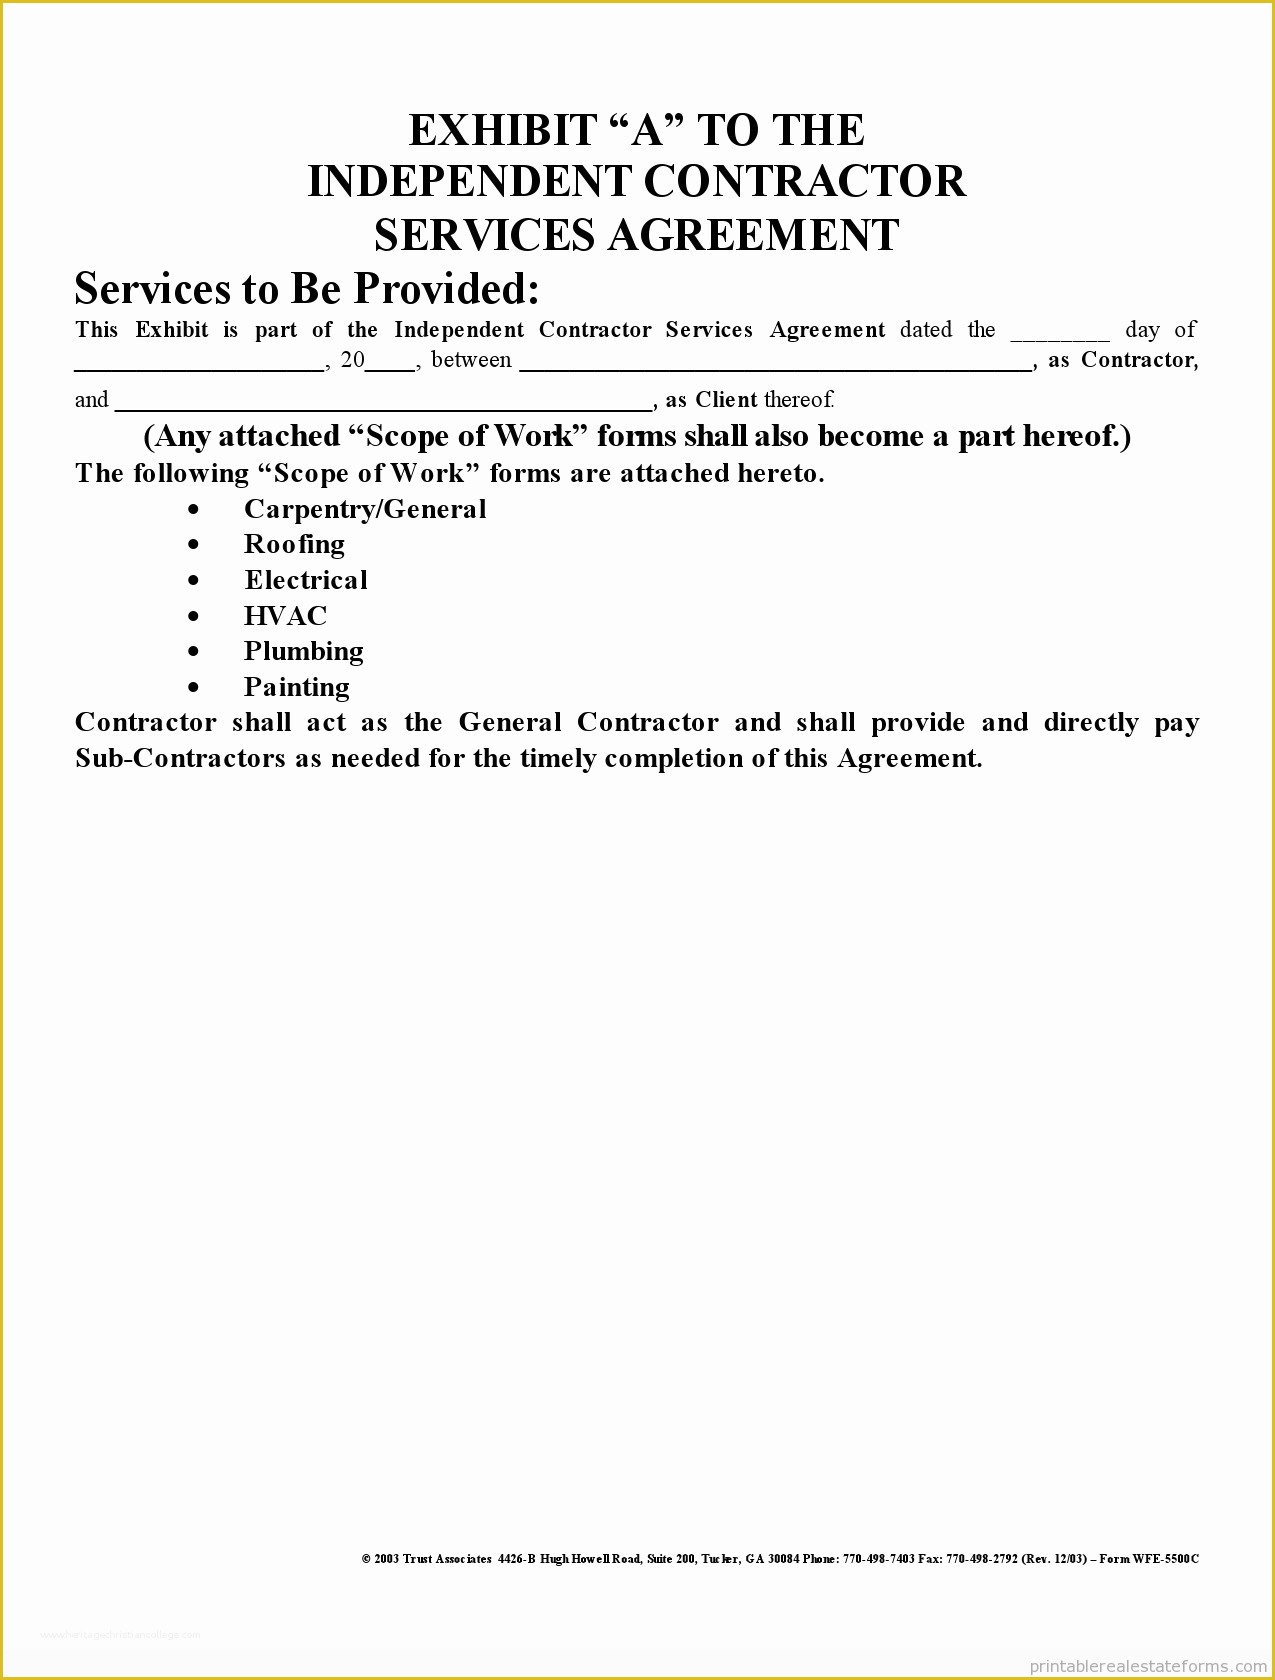 Free Independent Sales Contractor Agreement Template Of Free Printable Independent Contractor Agreement form